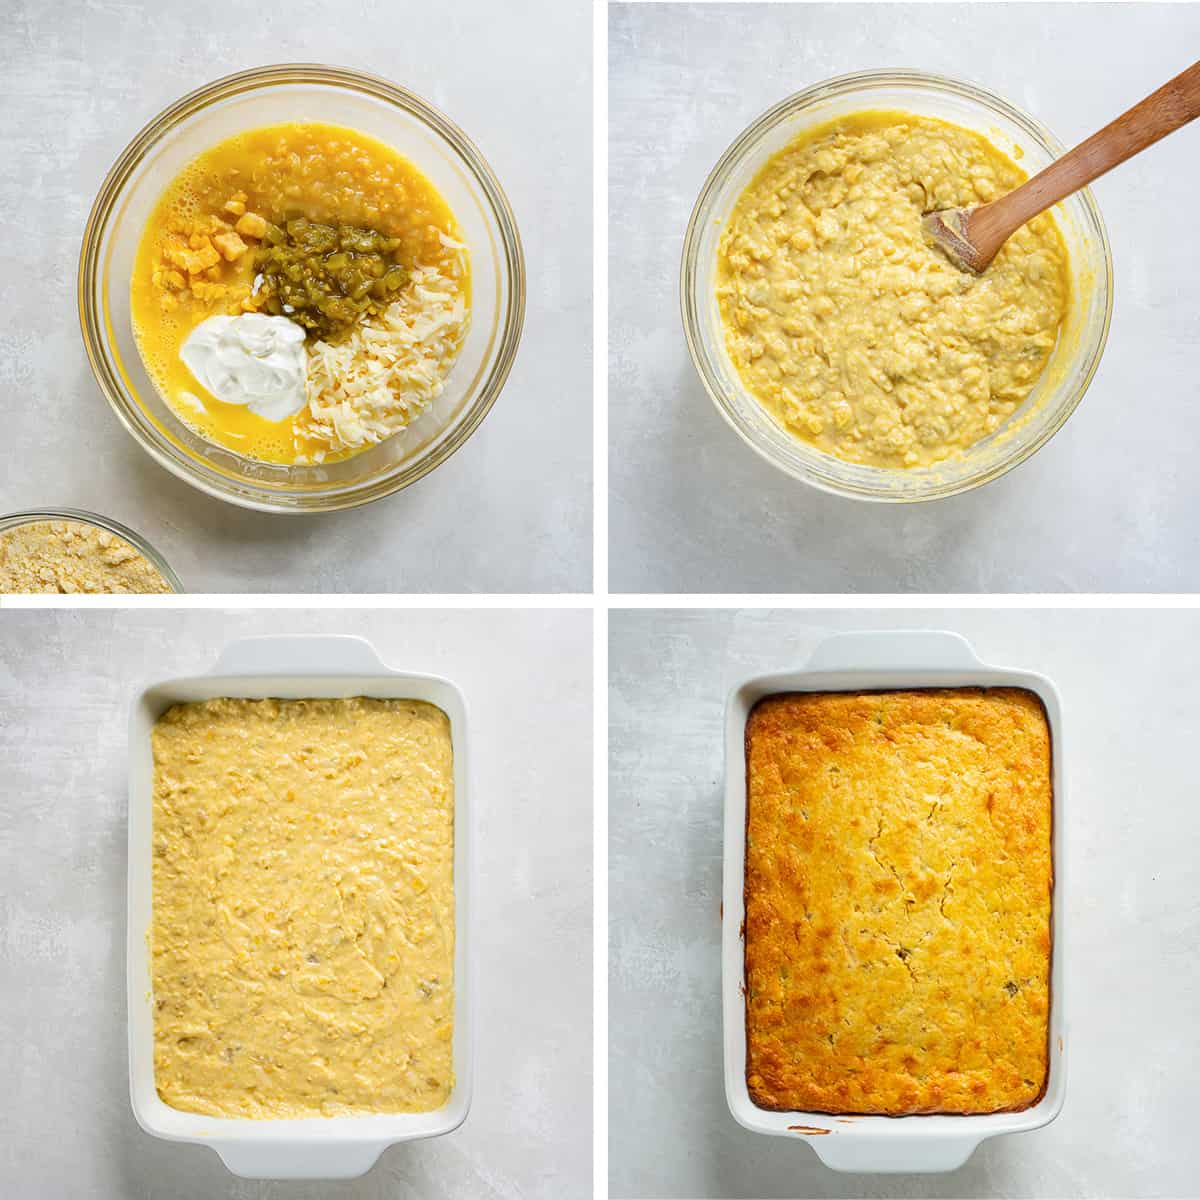 Four images showing a cornbread batter in a mixing bowl and baking dish before and after being baked.